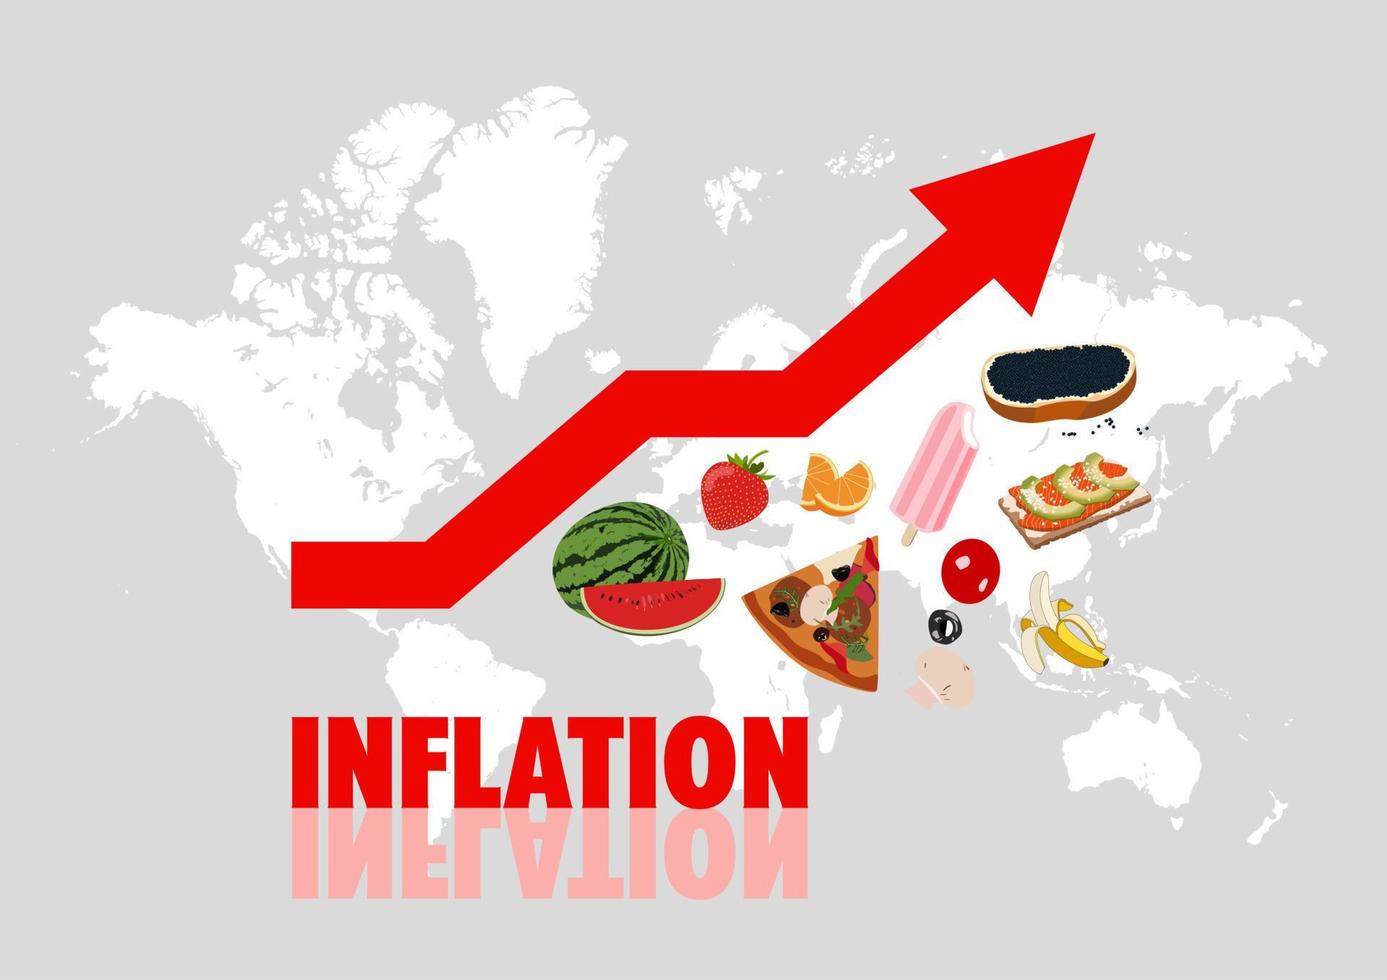 Food inflation and crisis going up. World map. Red arrow. Vegetables, fruits and other products. vector